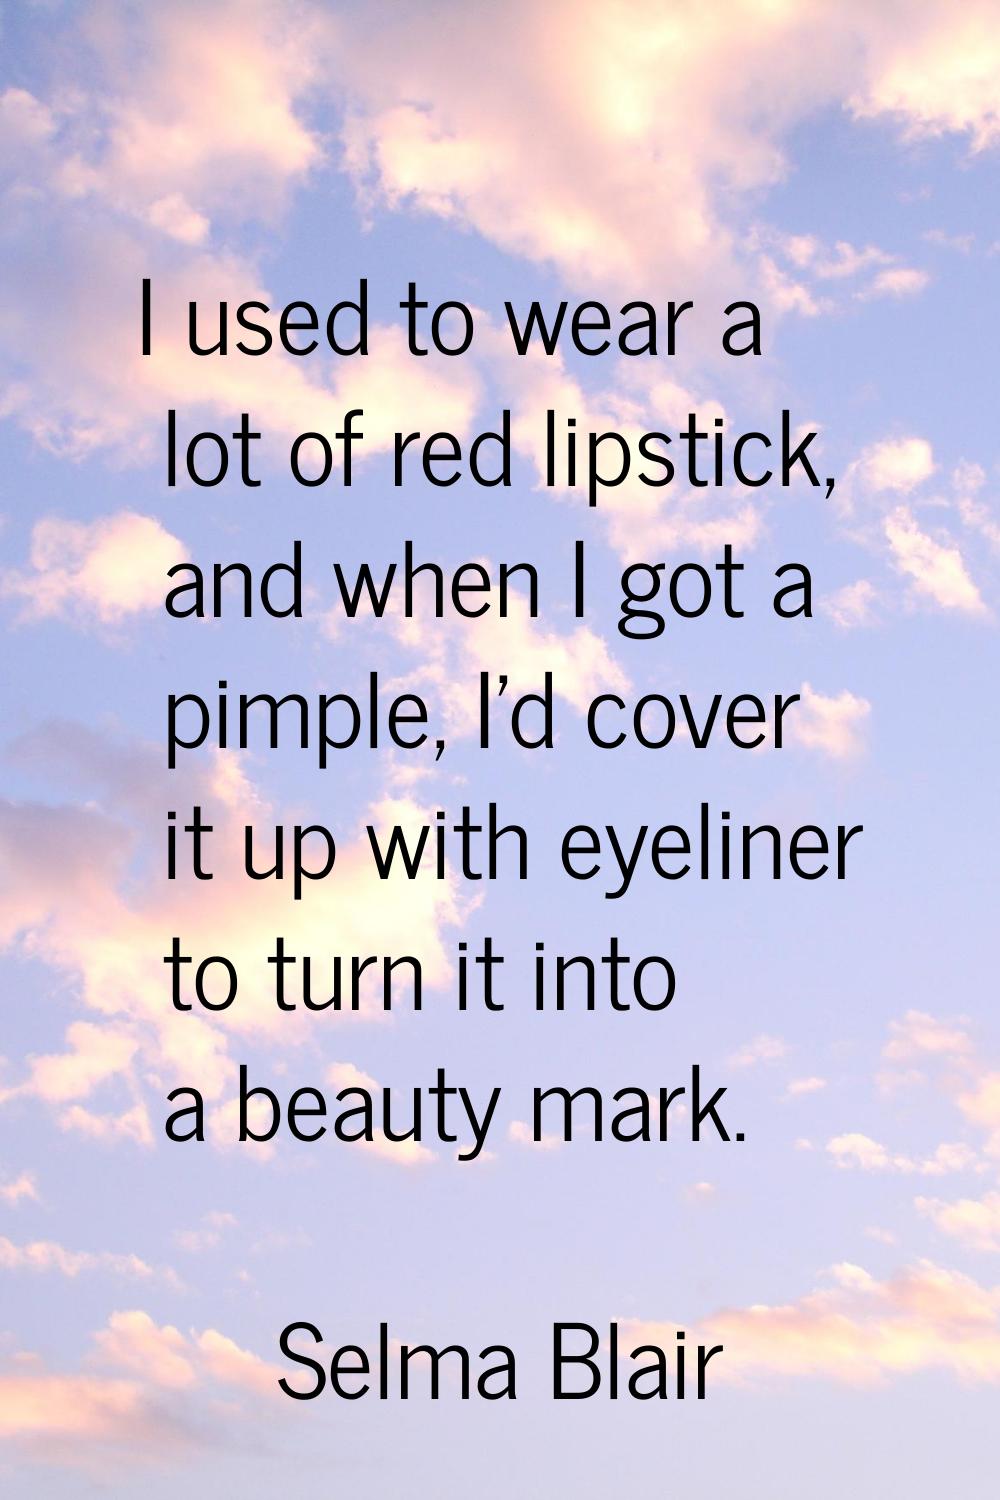 I used to wear a lot of red lipstick, and when I got a pimple, I'd cover it up with eyeliner to tur